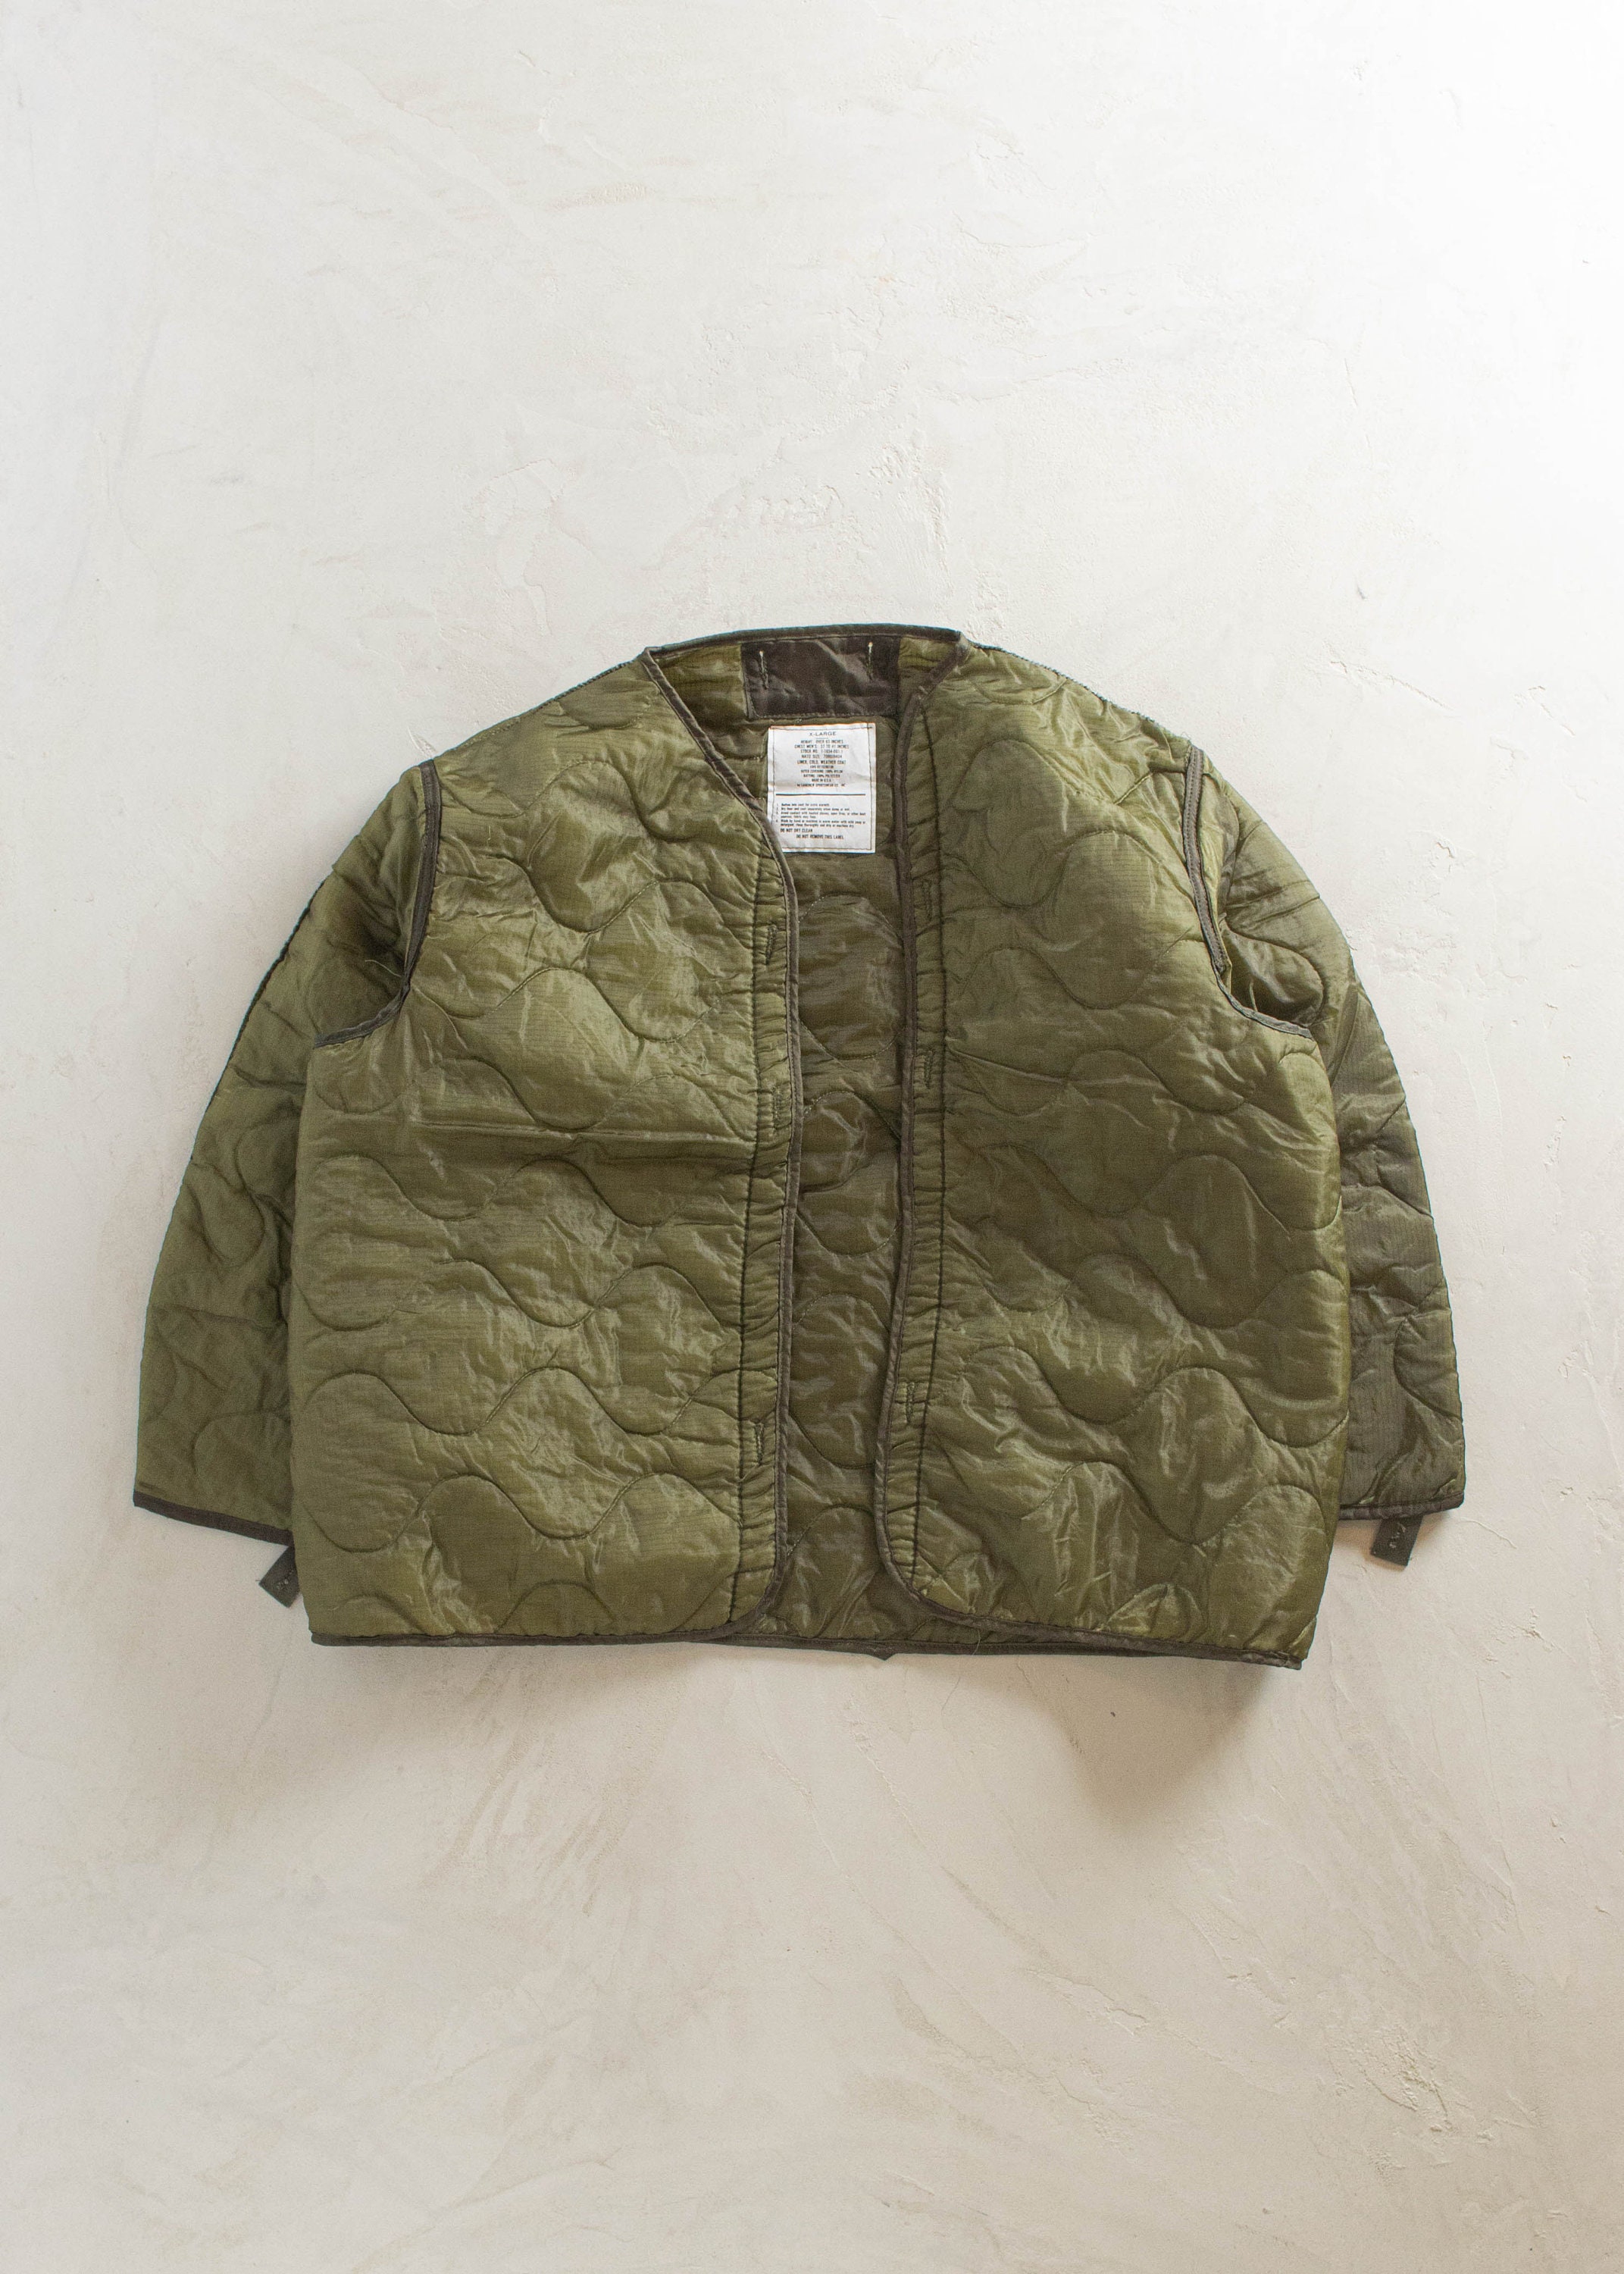 Military Quilted Padded Parka Jacket Liners M65 M51 Green 